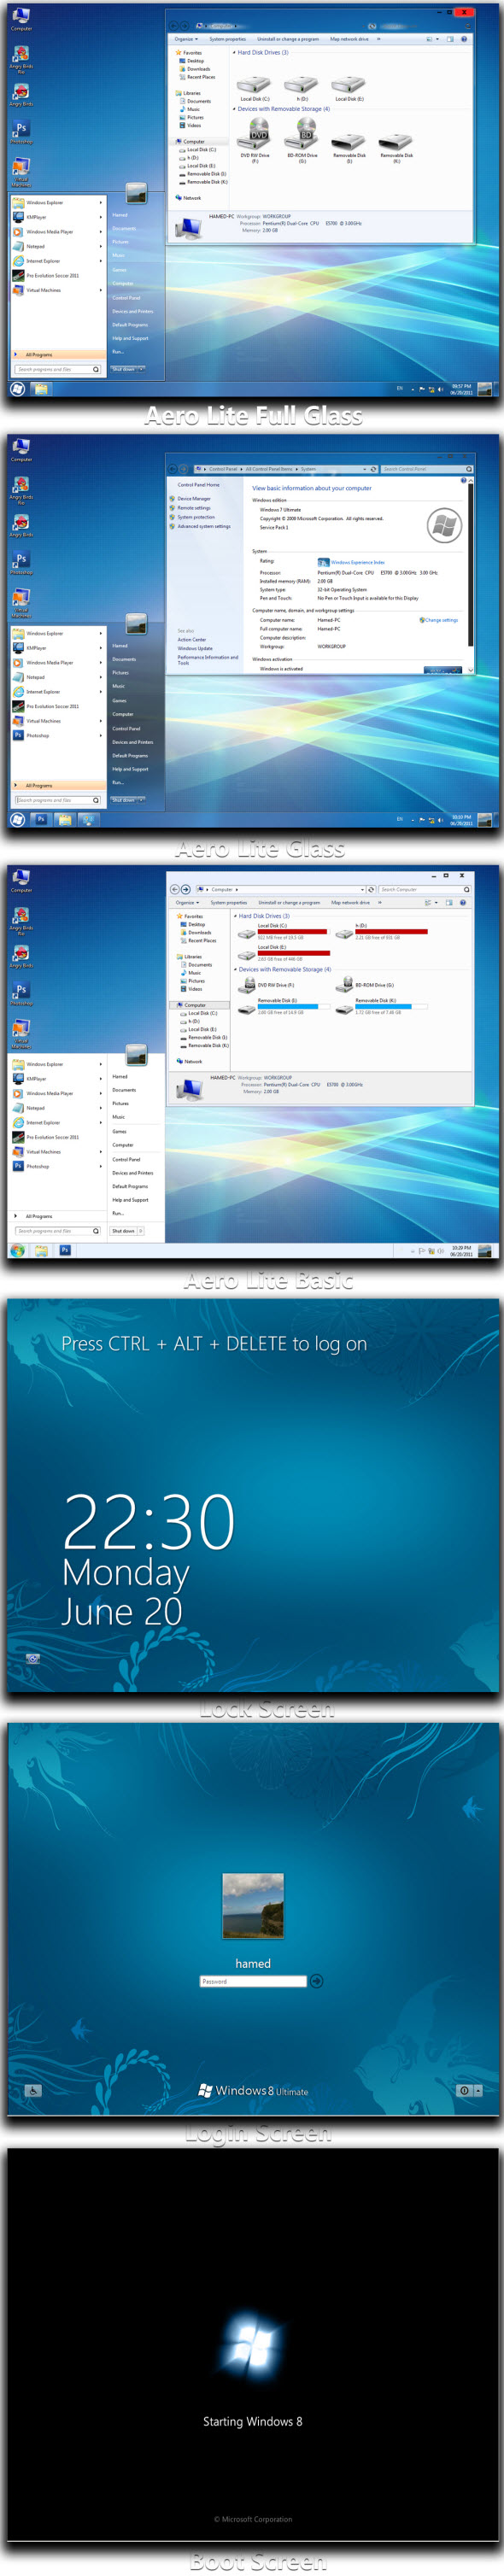 Windows 8 Transformation Pack for Windows 7